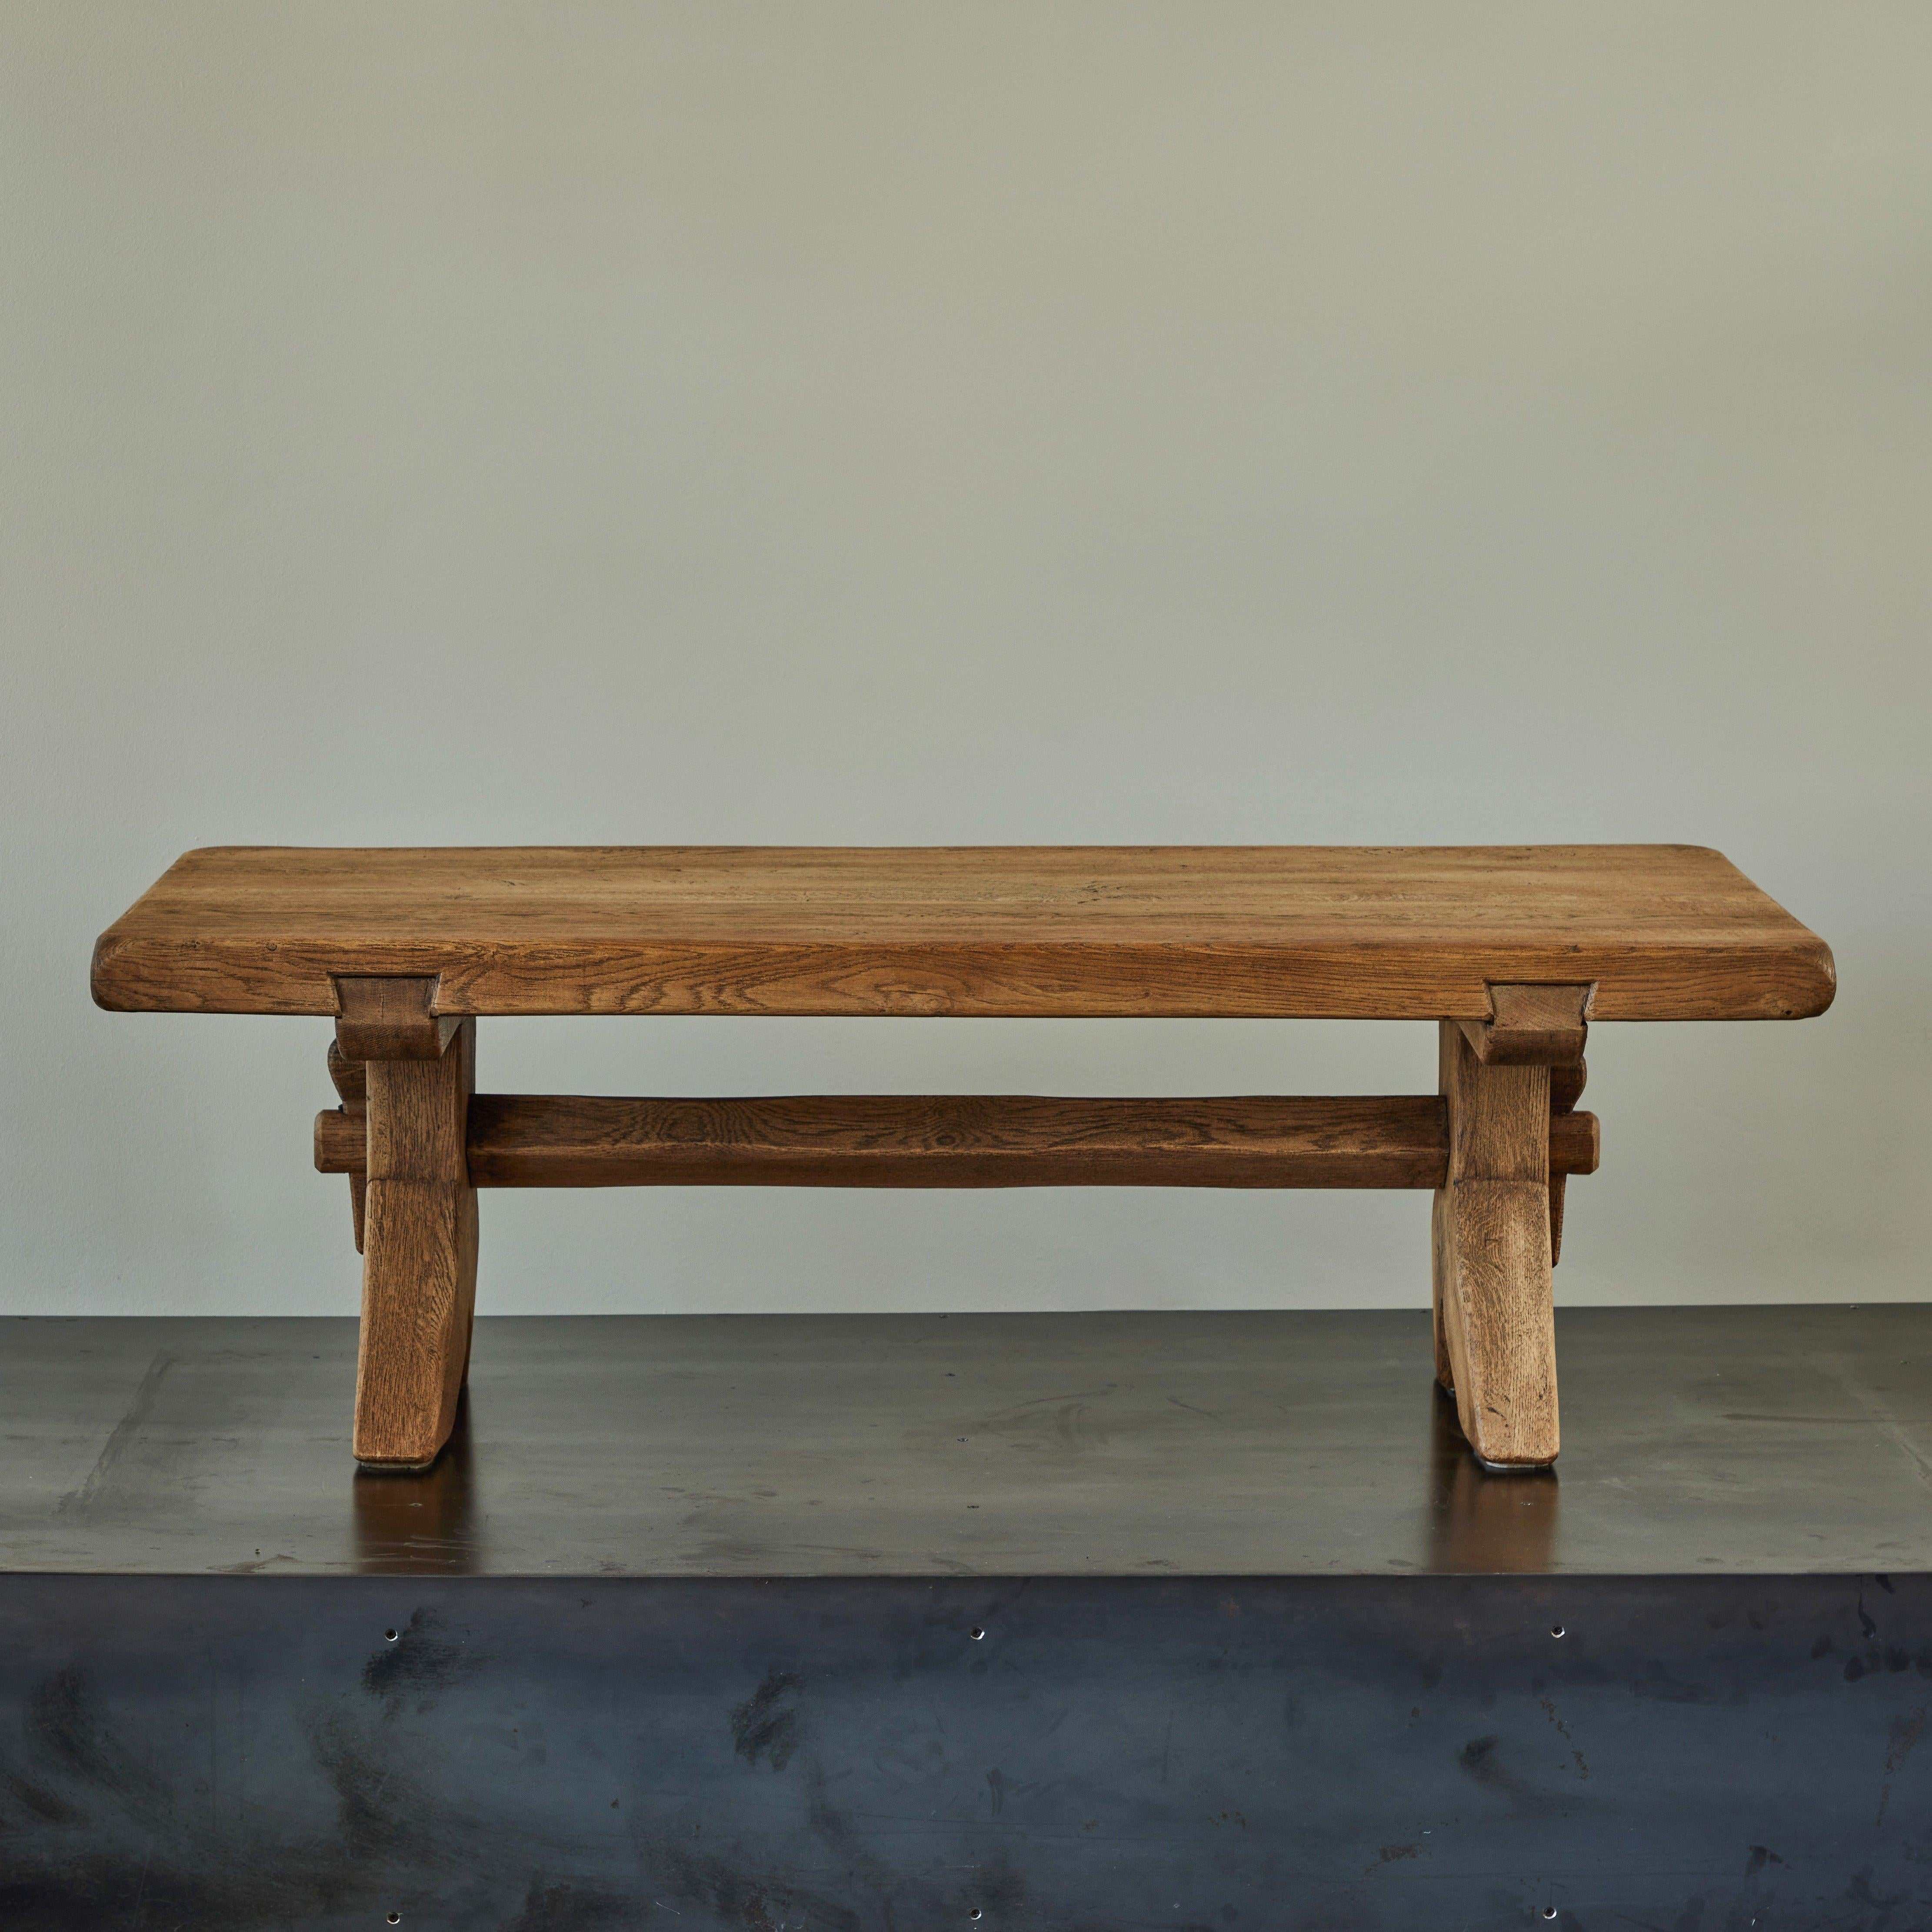 Solid oak coffee table designed by De Puydt. Lovely 'dry' construction with pegged joints, chocked tenons and dovetail cleats. The scale of timber is incredible, giving this Belgian midcentury table a chunky rustic feel.

Belgium, circa